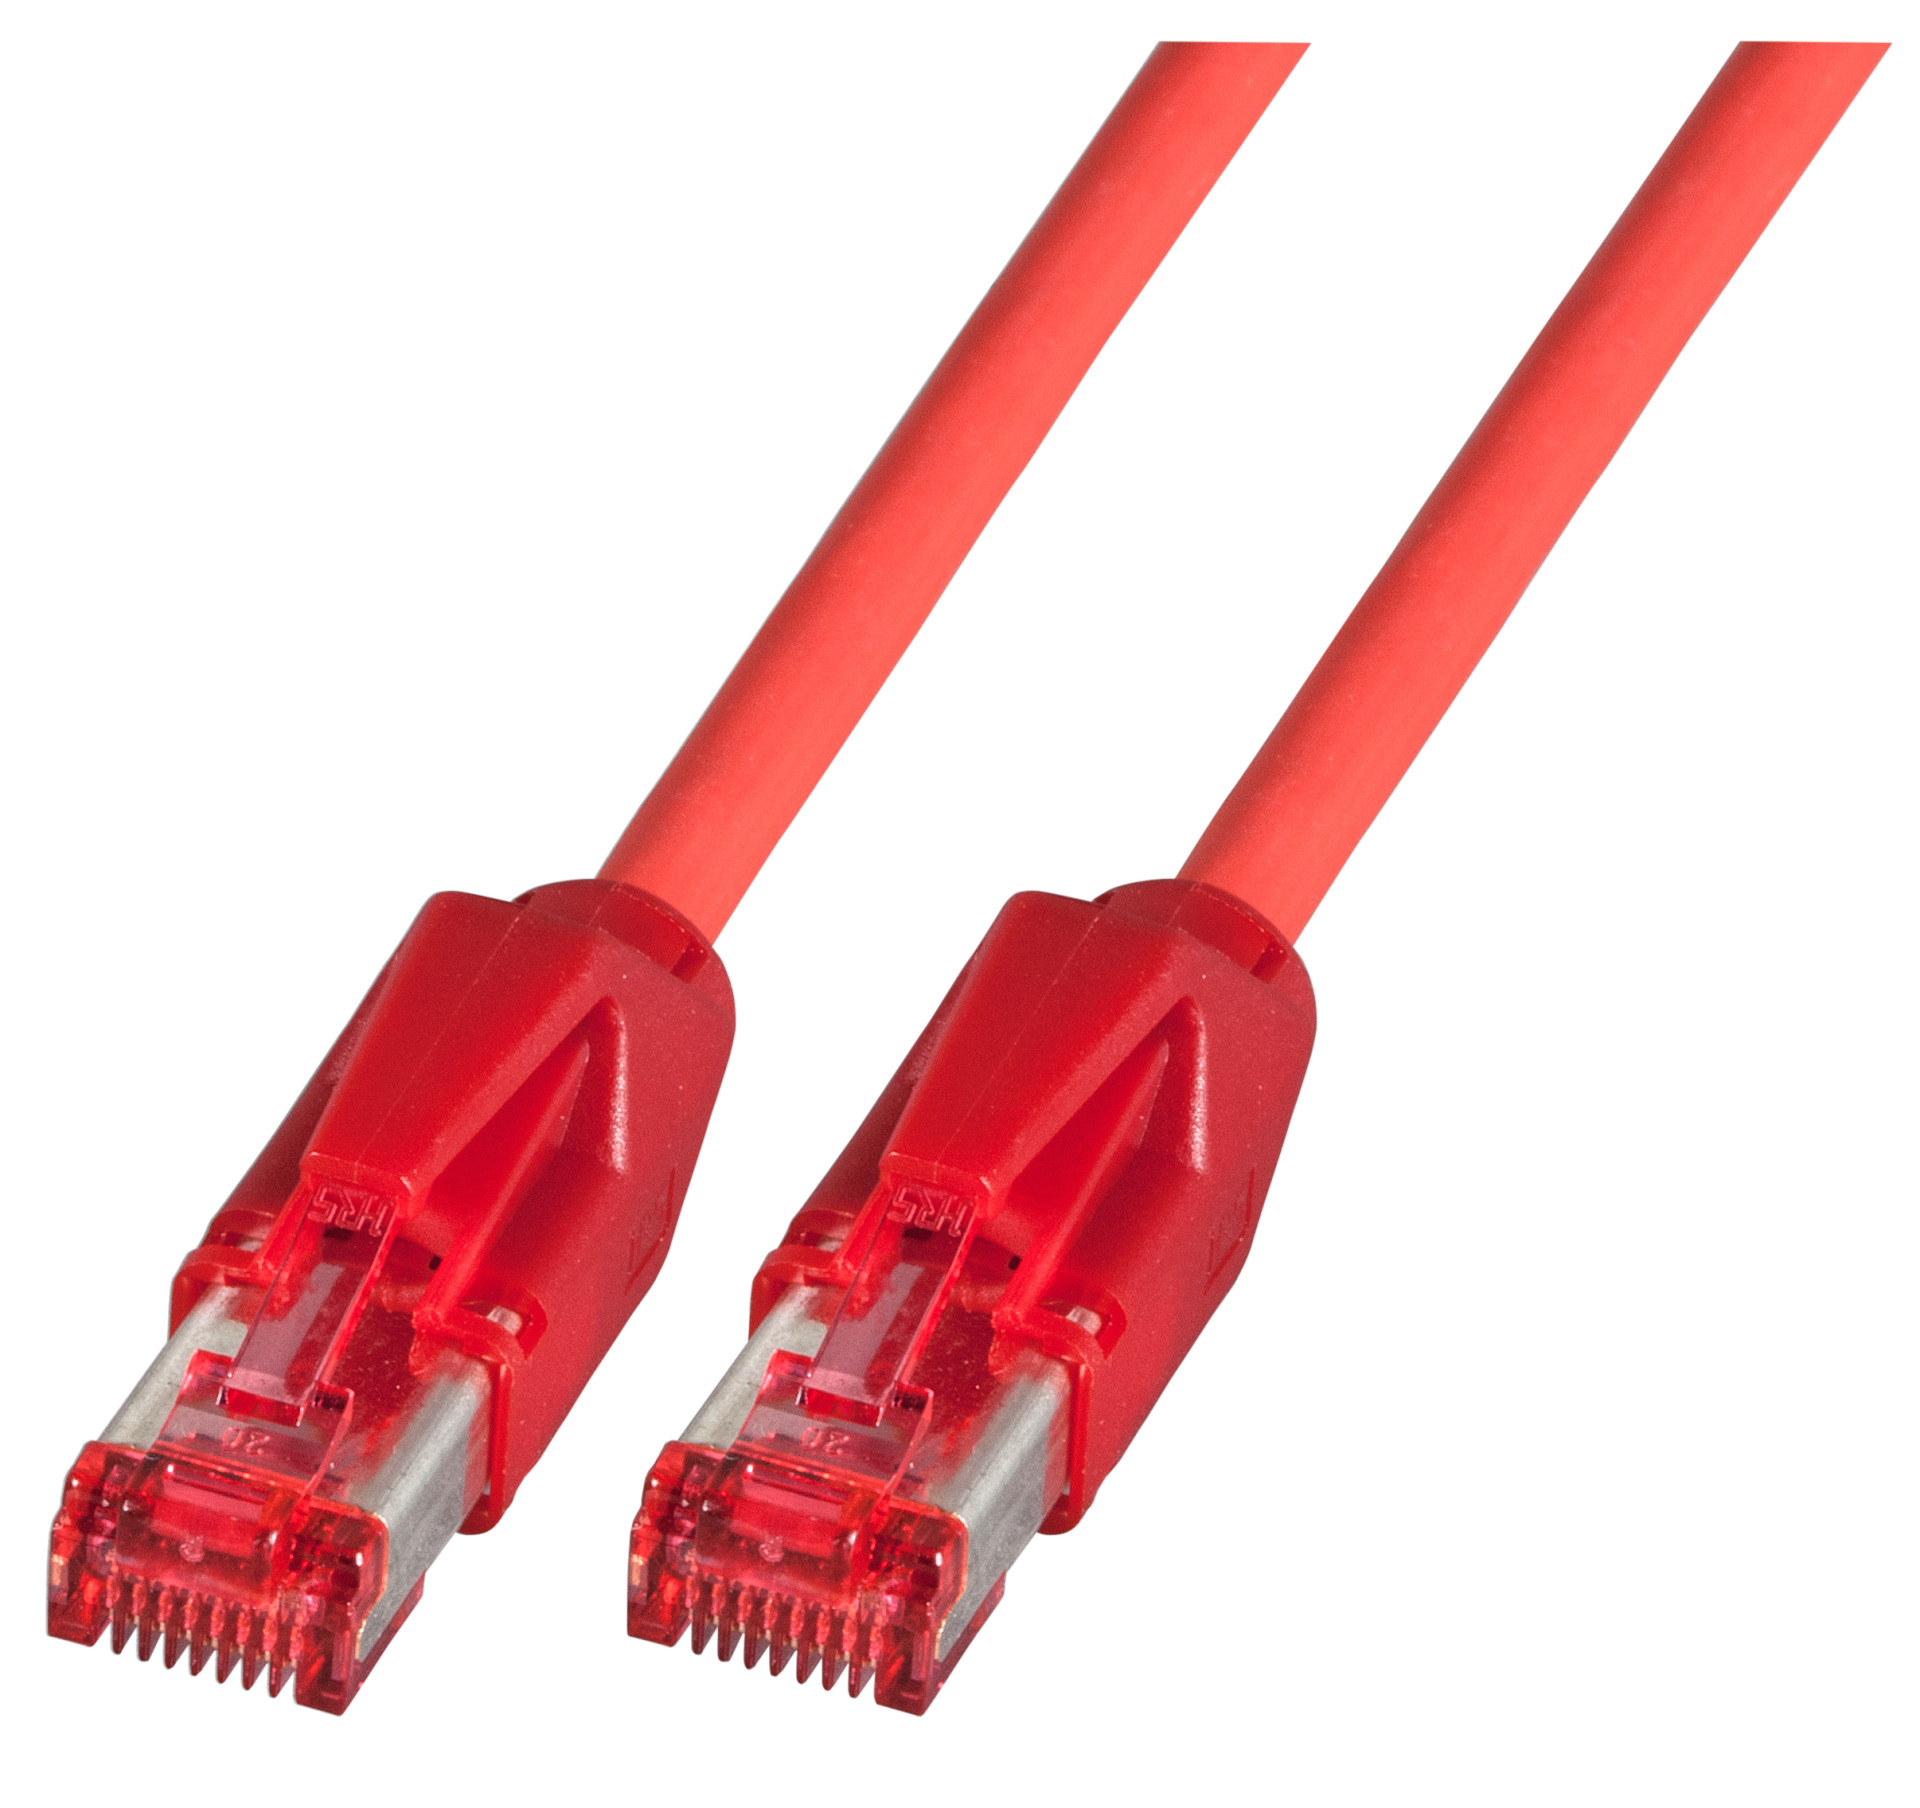 RJ45 Patch cable S/FTP, Cat.6A, TM21, Dätwyler 7702, 1m, red